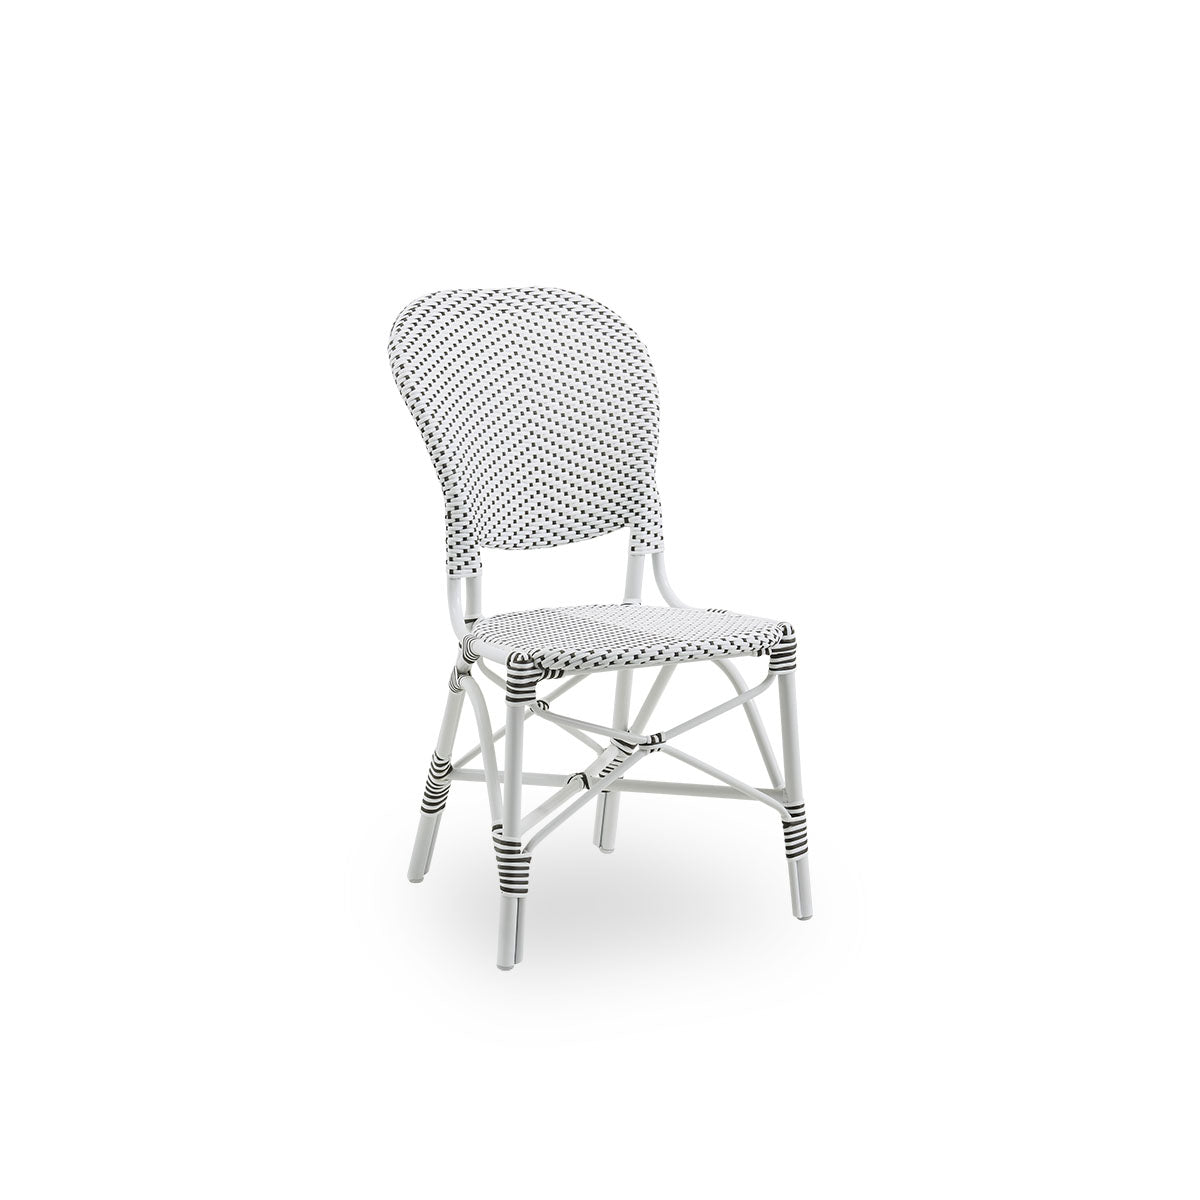 Seat cushion | Isabell Exterior Dining Chair